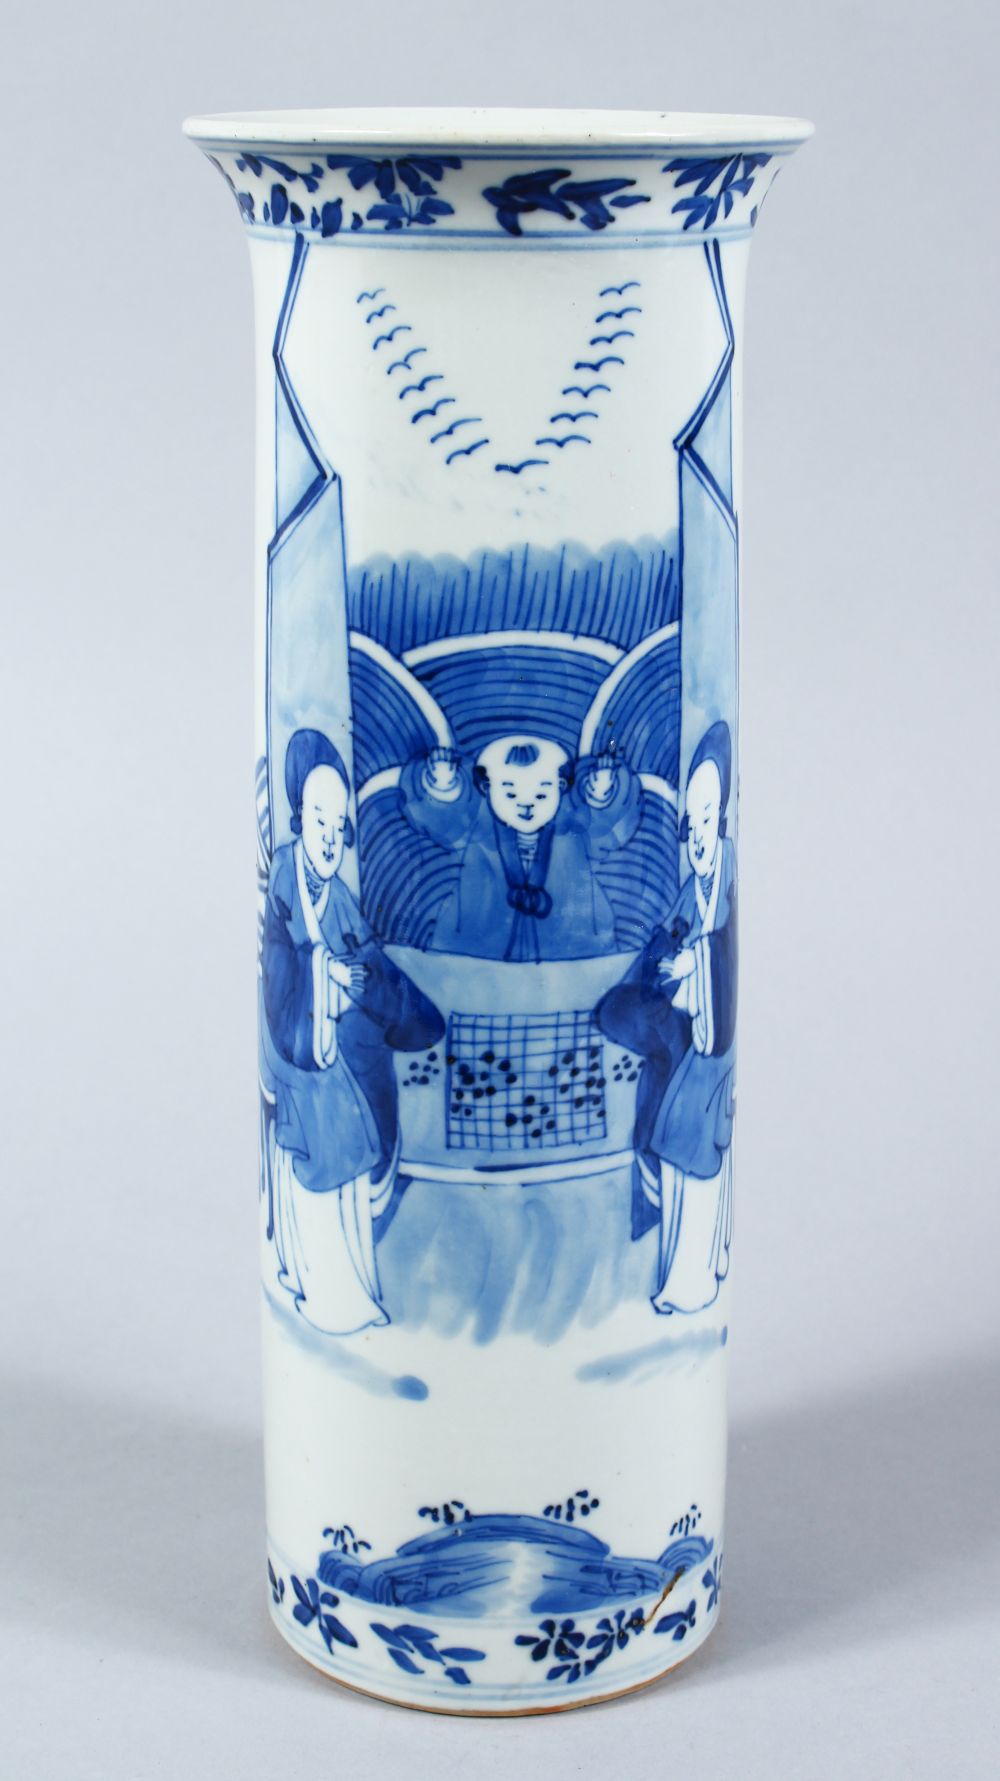 A 19TH CENTURY CHINESE BLUE & WHITE PORCELAIN CYLINDRICAL VASE, the vase decorated with scenes of